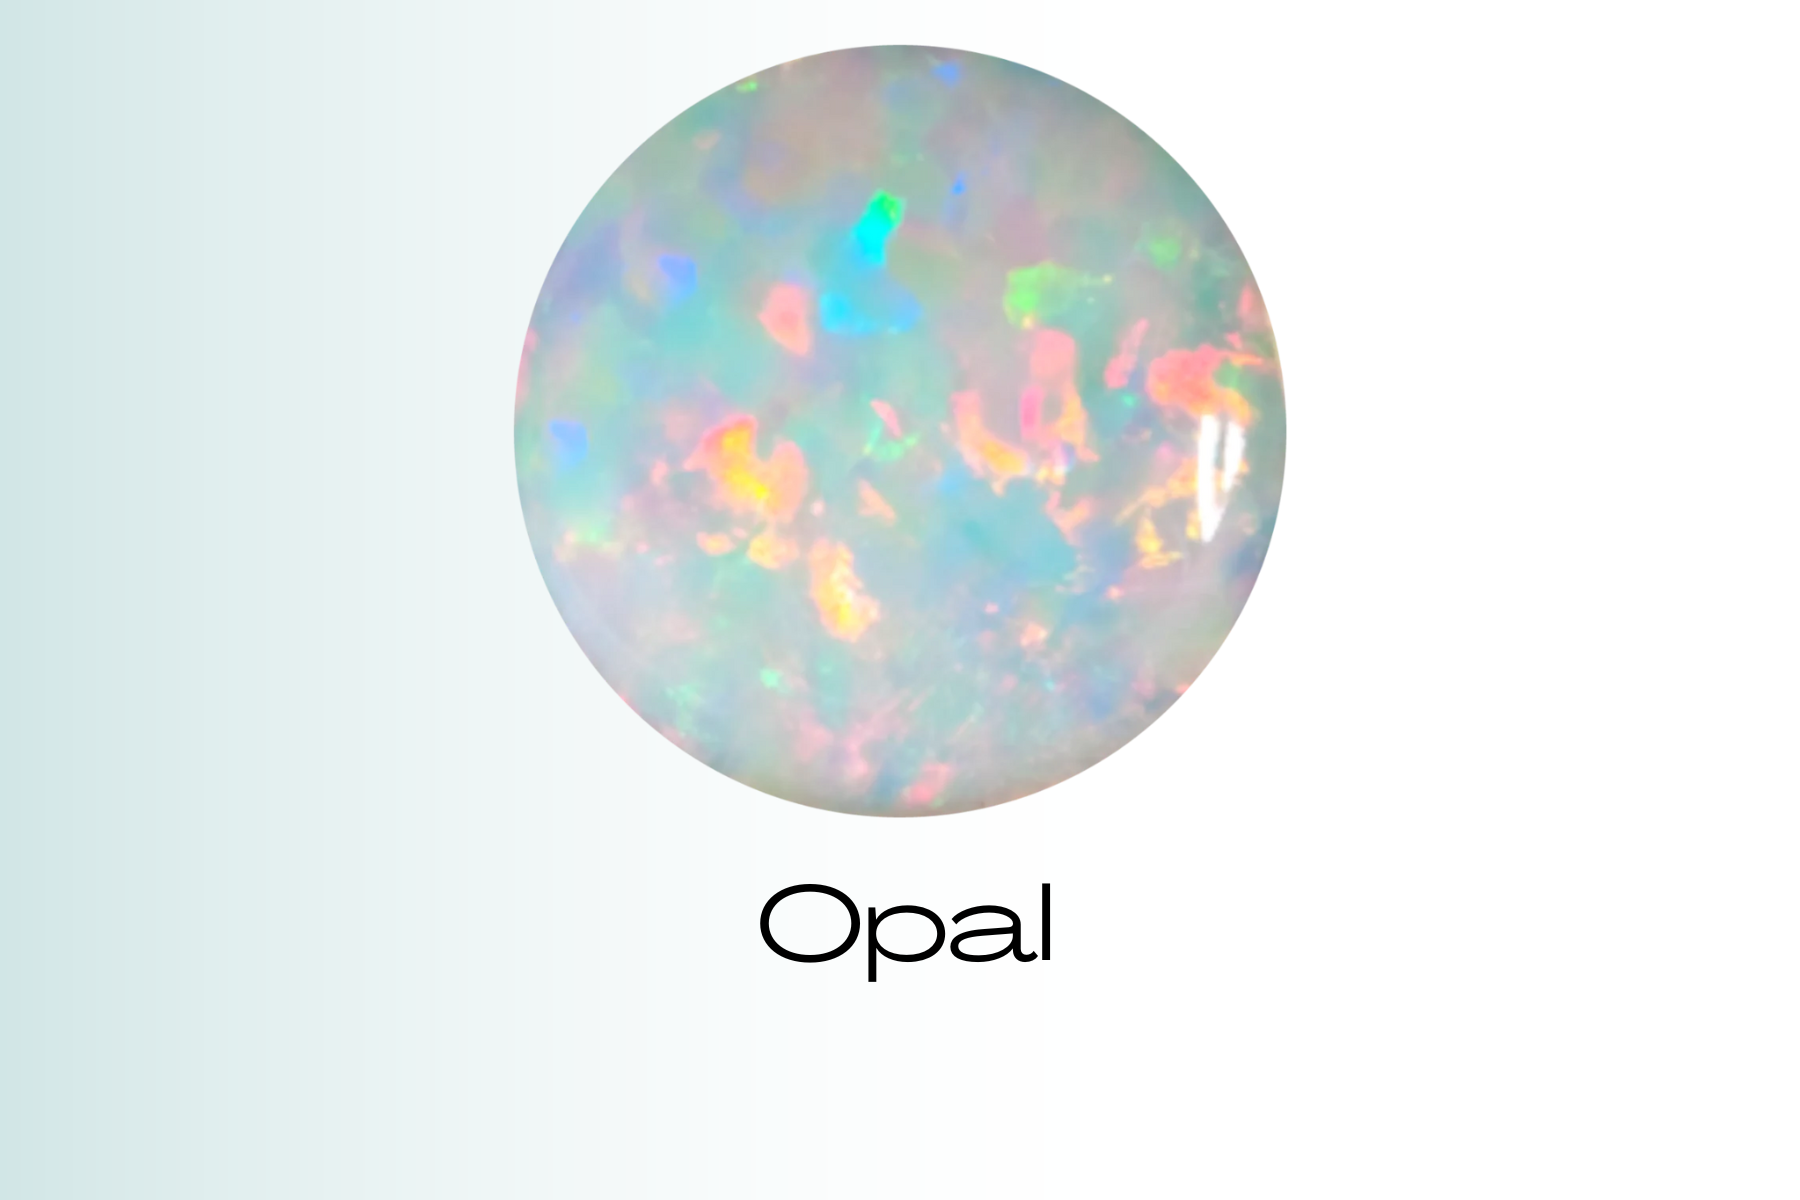 A round and multicolored opal stone